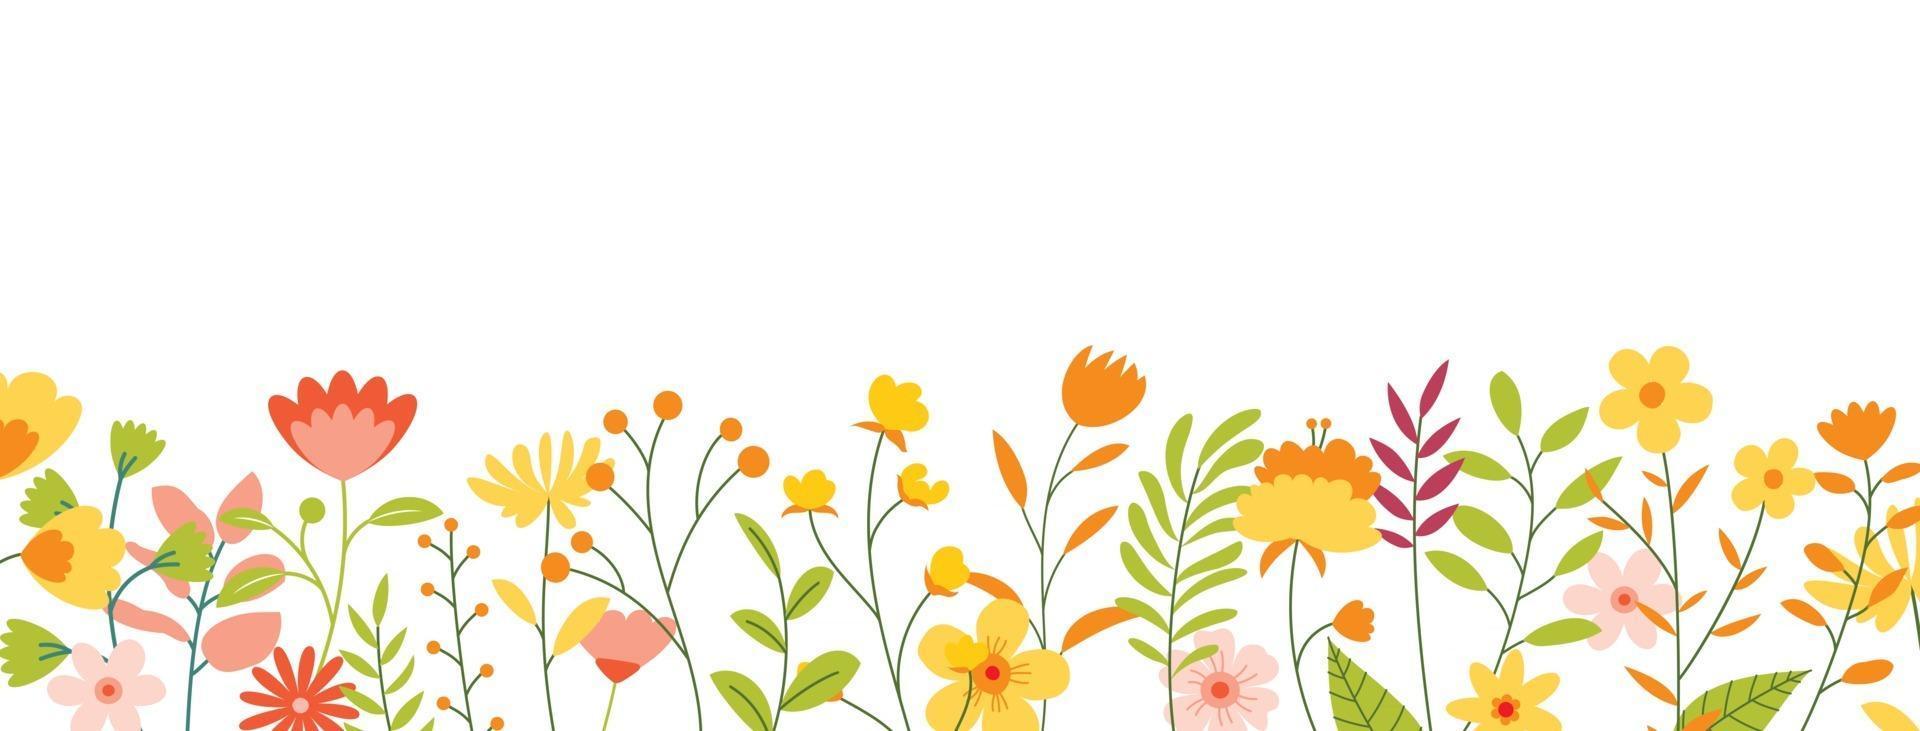 Flowers and leaves horizontal background Floral spring backdrop with ...